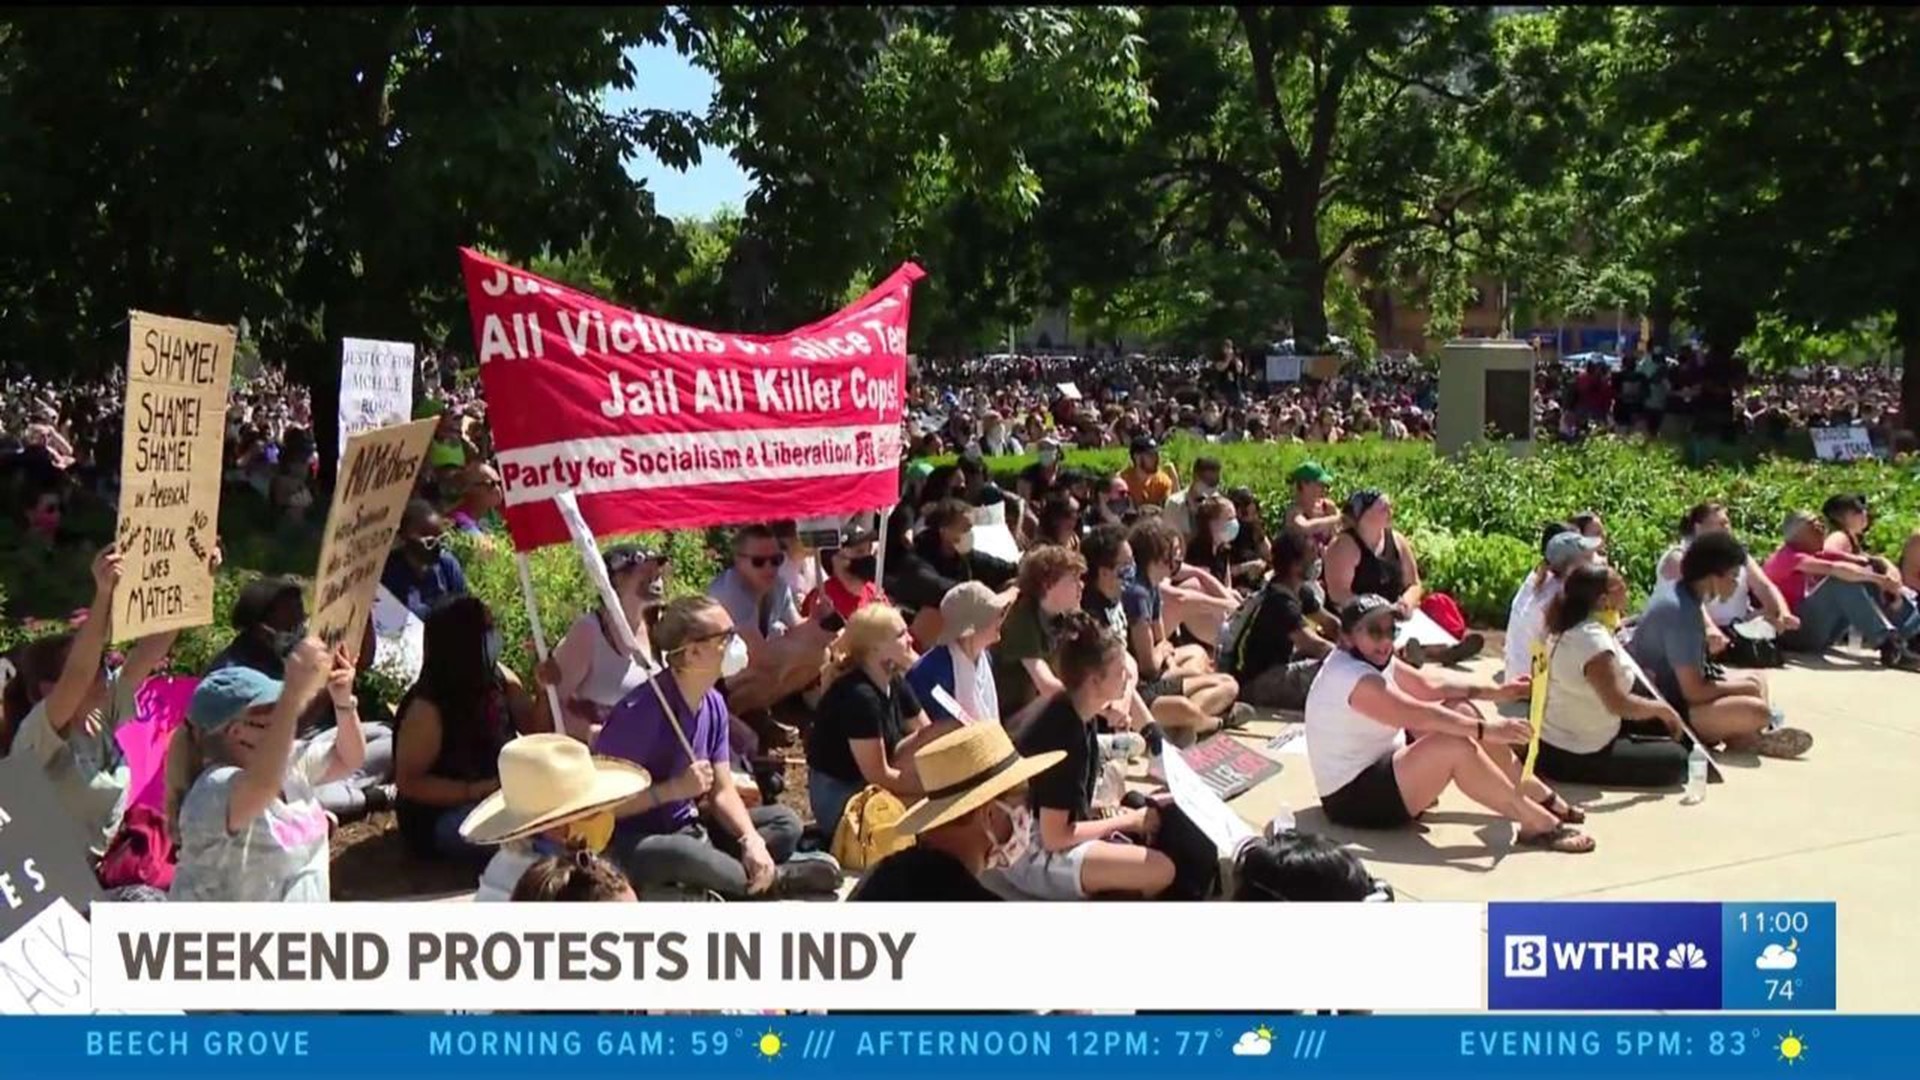 Huge crowd for Saturday sit-in